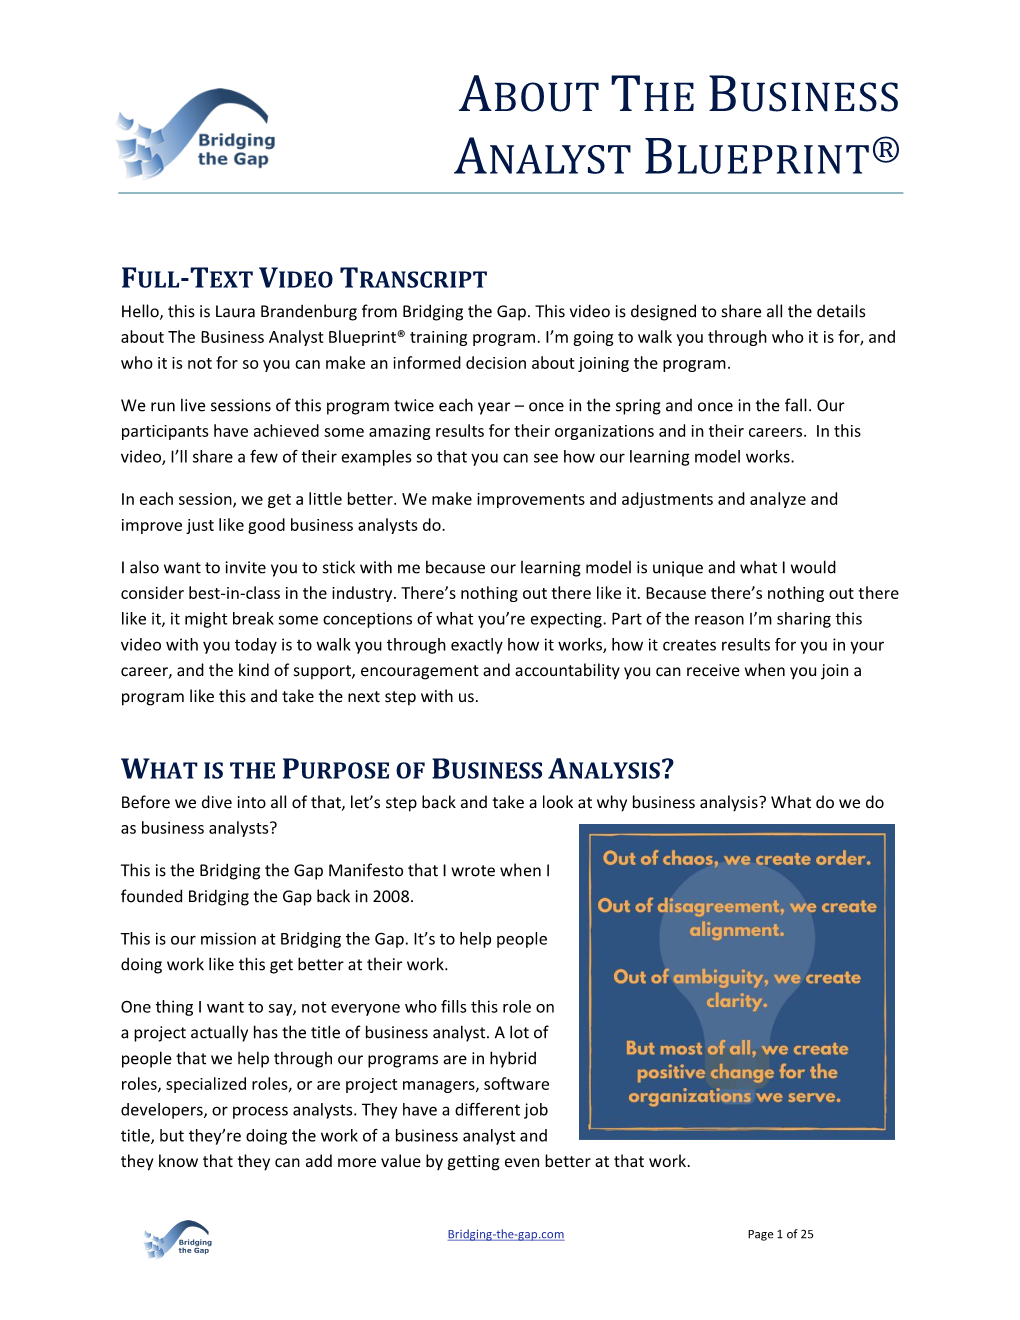 About the Business Analyst Blueprint®